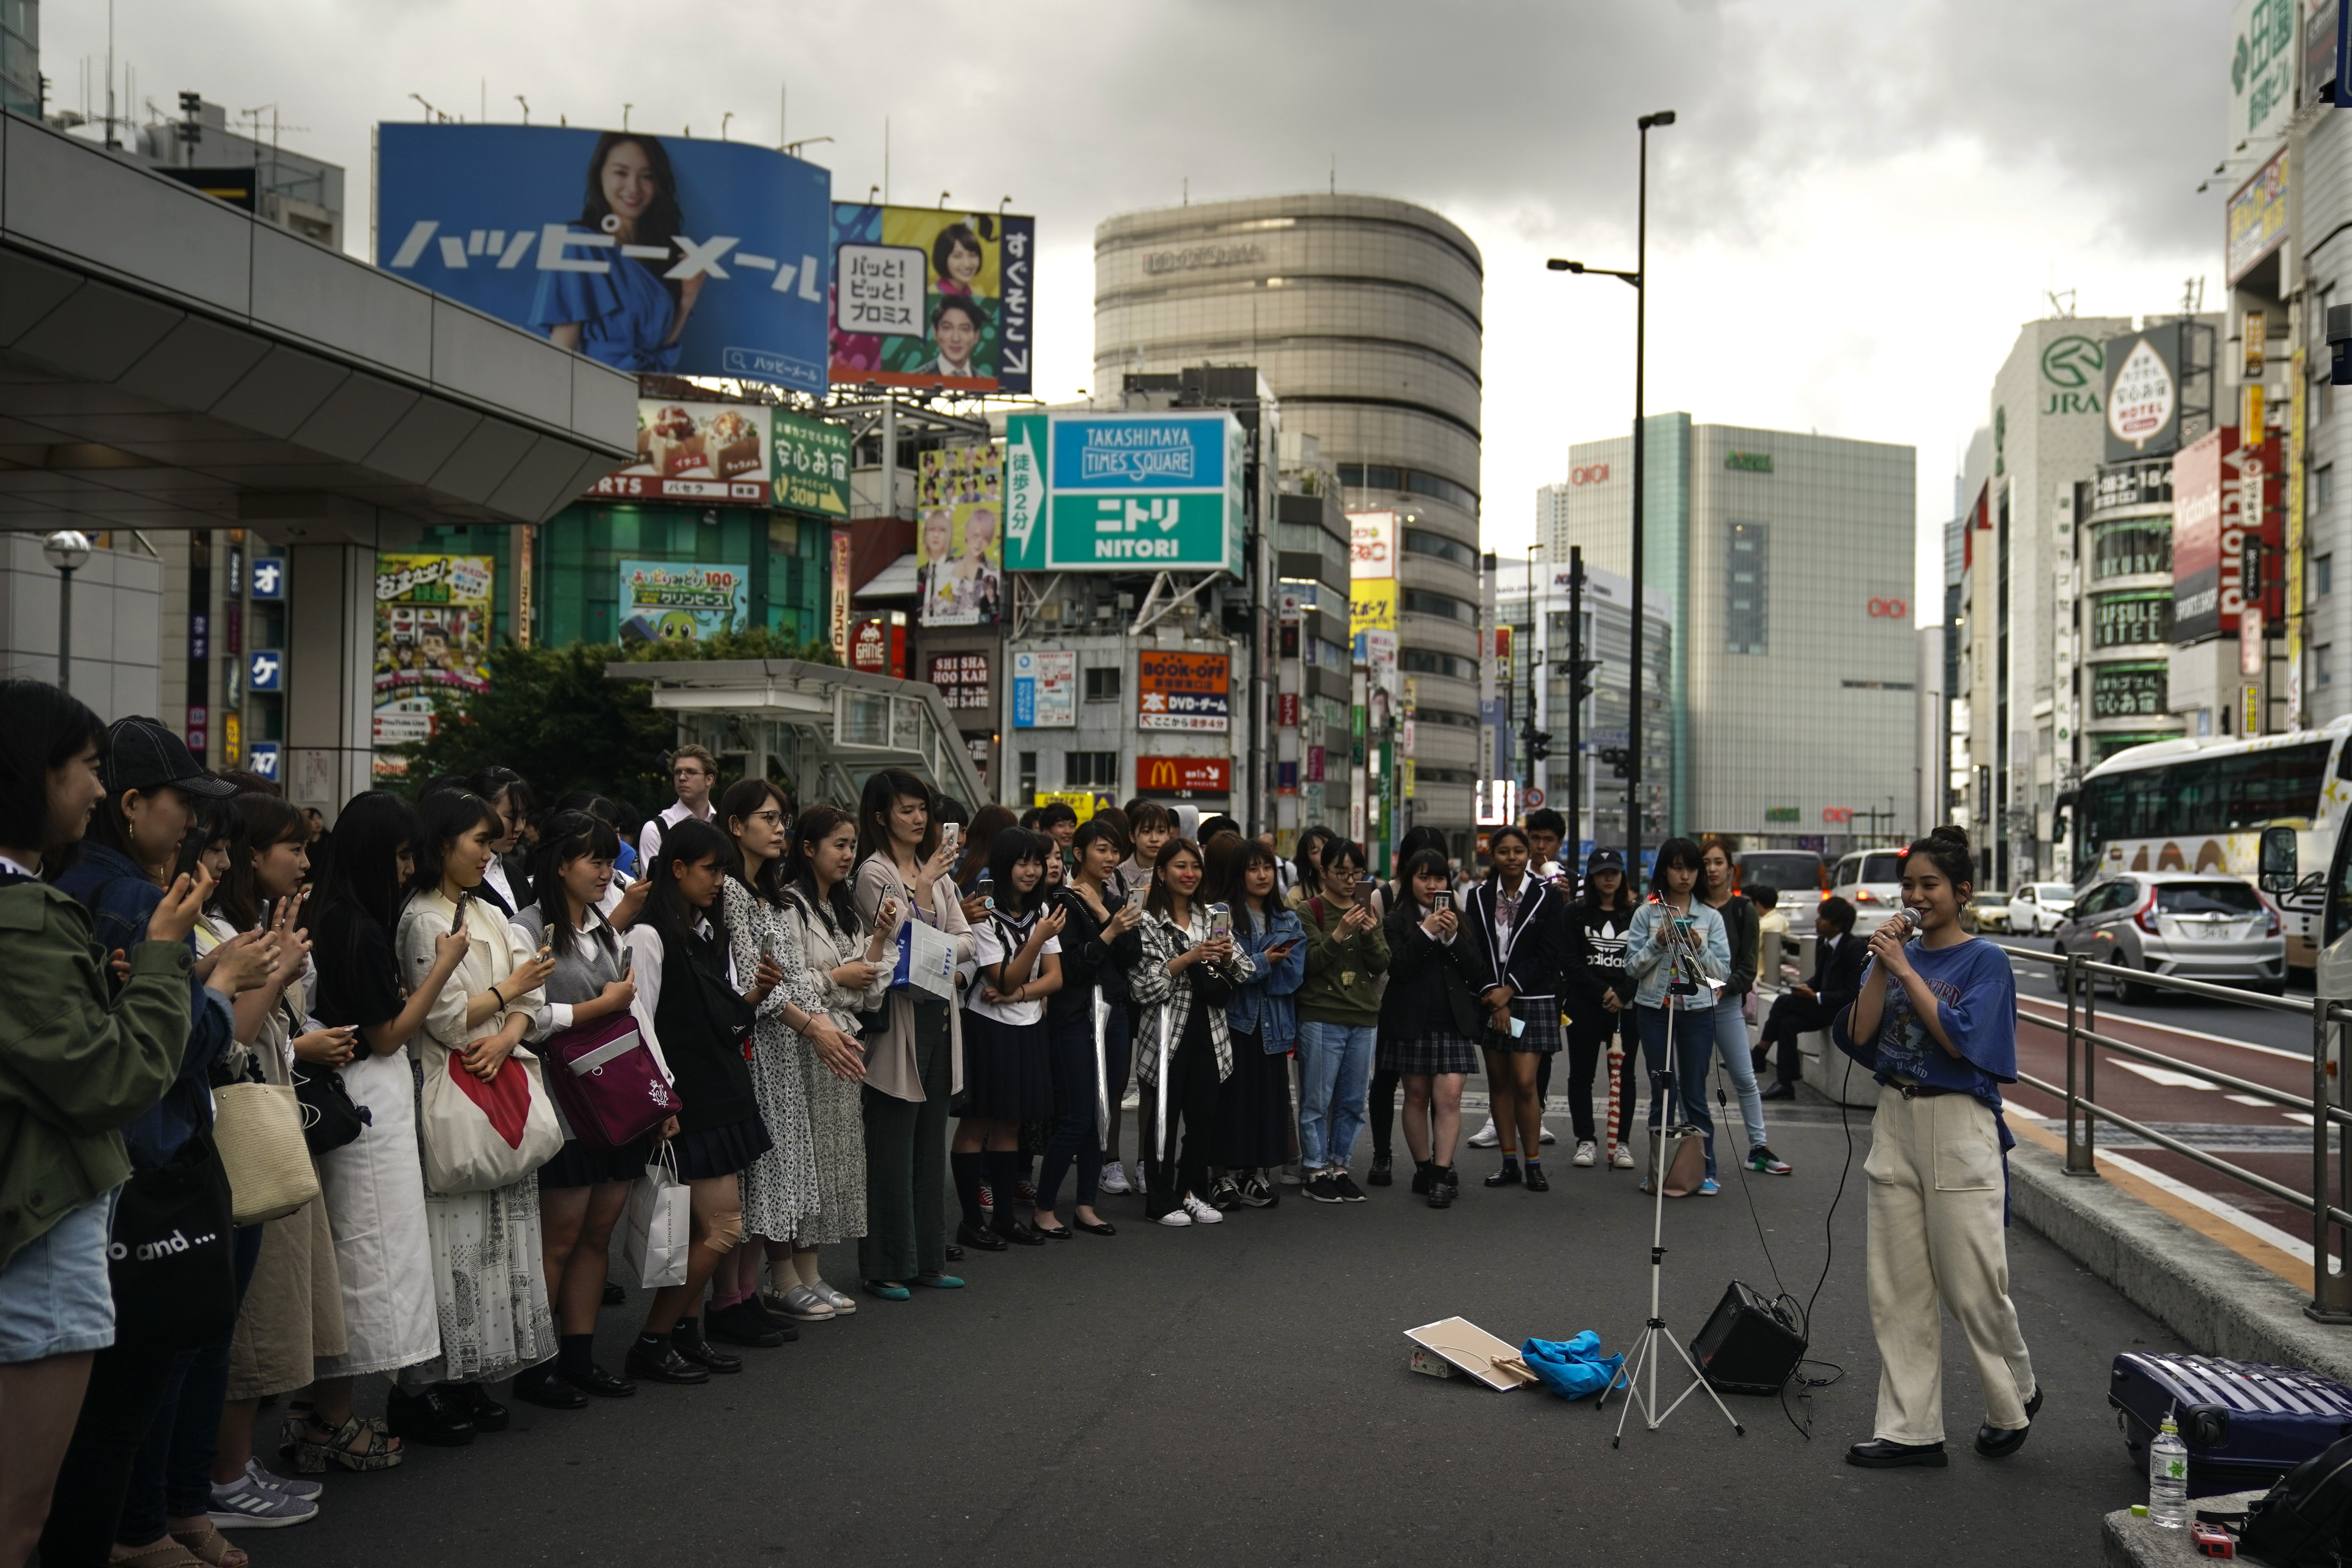 A street performer sings as she is surrounded by spectators outside the Shinjuku Station Monday, May 20, 2019, in Tokyo. (AP Photo/Jae C. Hong)